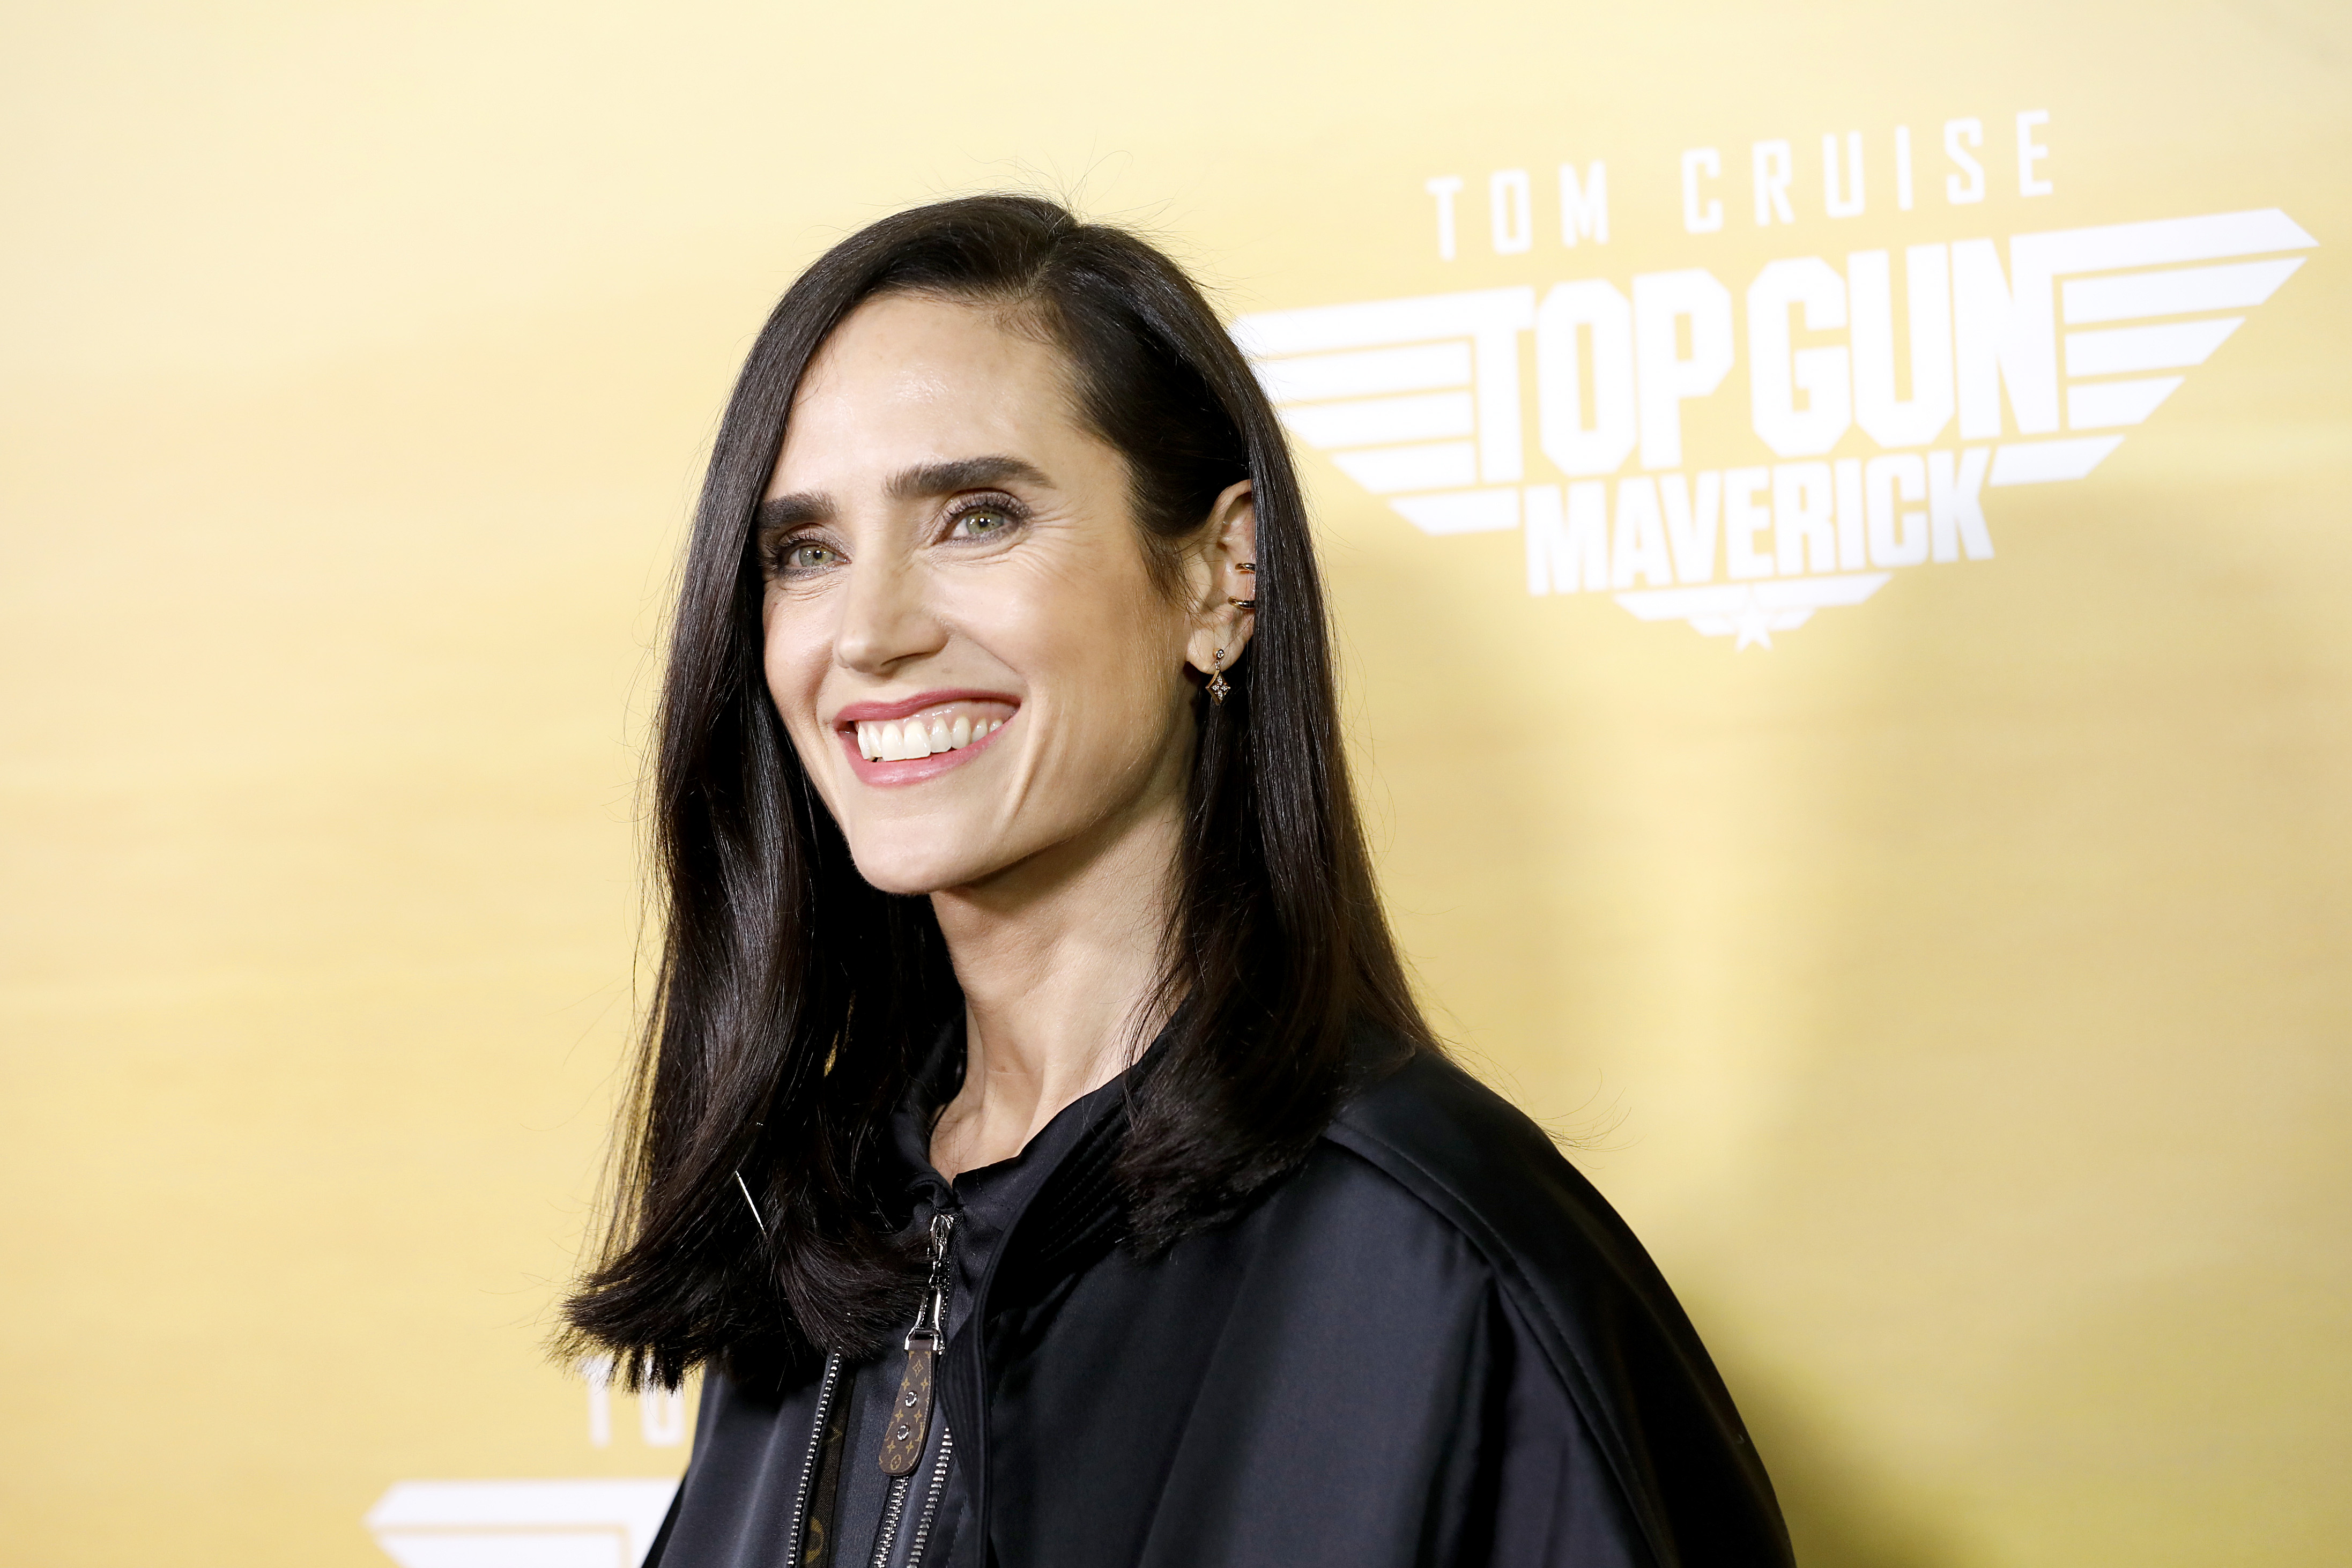 Actress Jennifer Connelly attends a special screening of "Top Gun: Maverick" at AMC Magic Johnson Harlem on May 23, 2022 in New York | Source: Getty Images